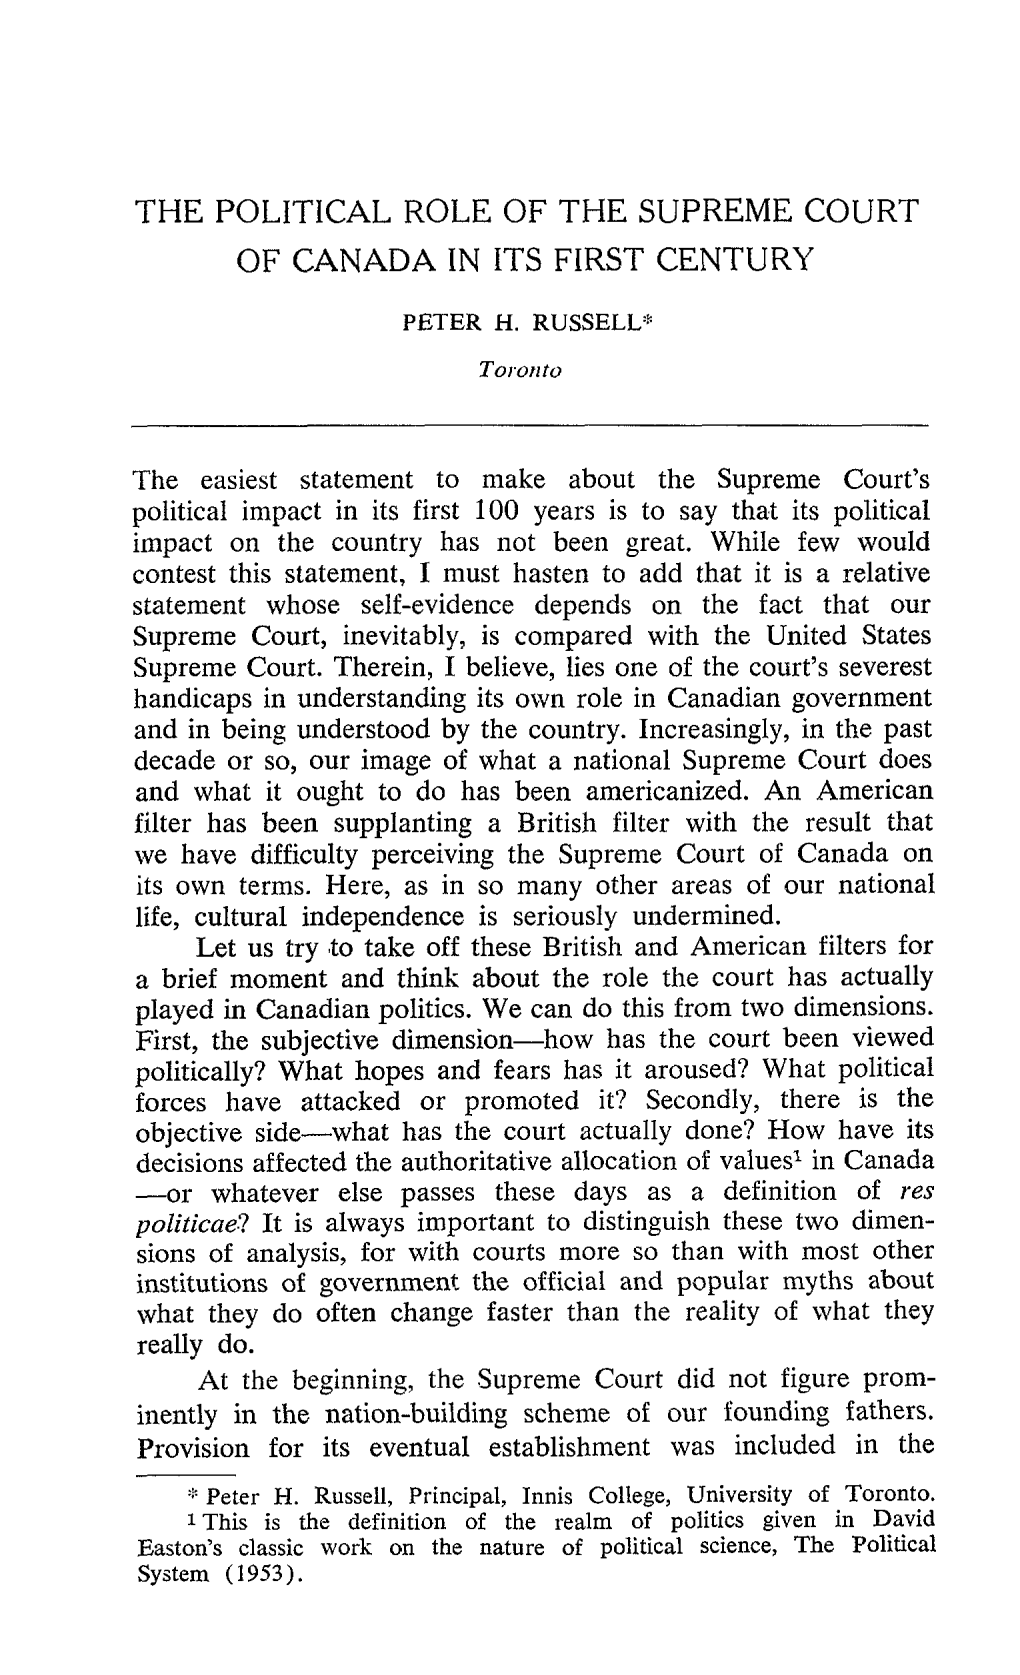 The Political Role of the Supreme Court of Canada in Its First Century